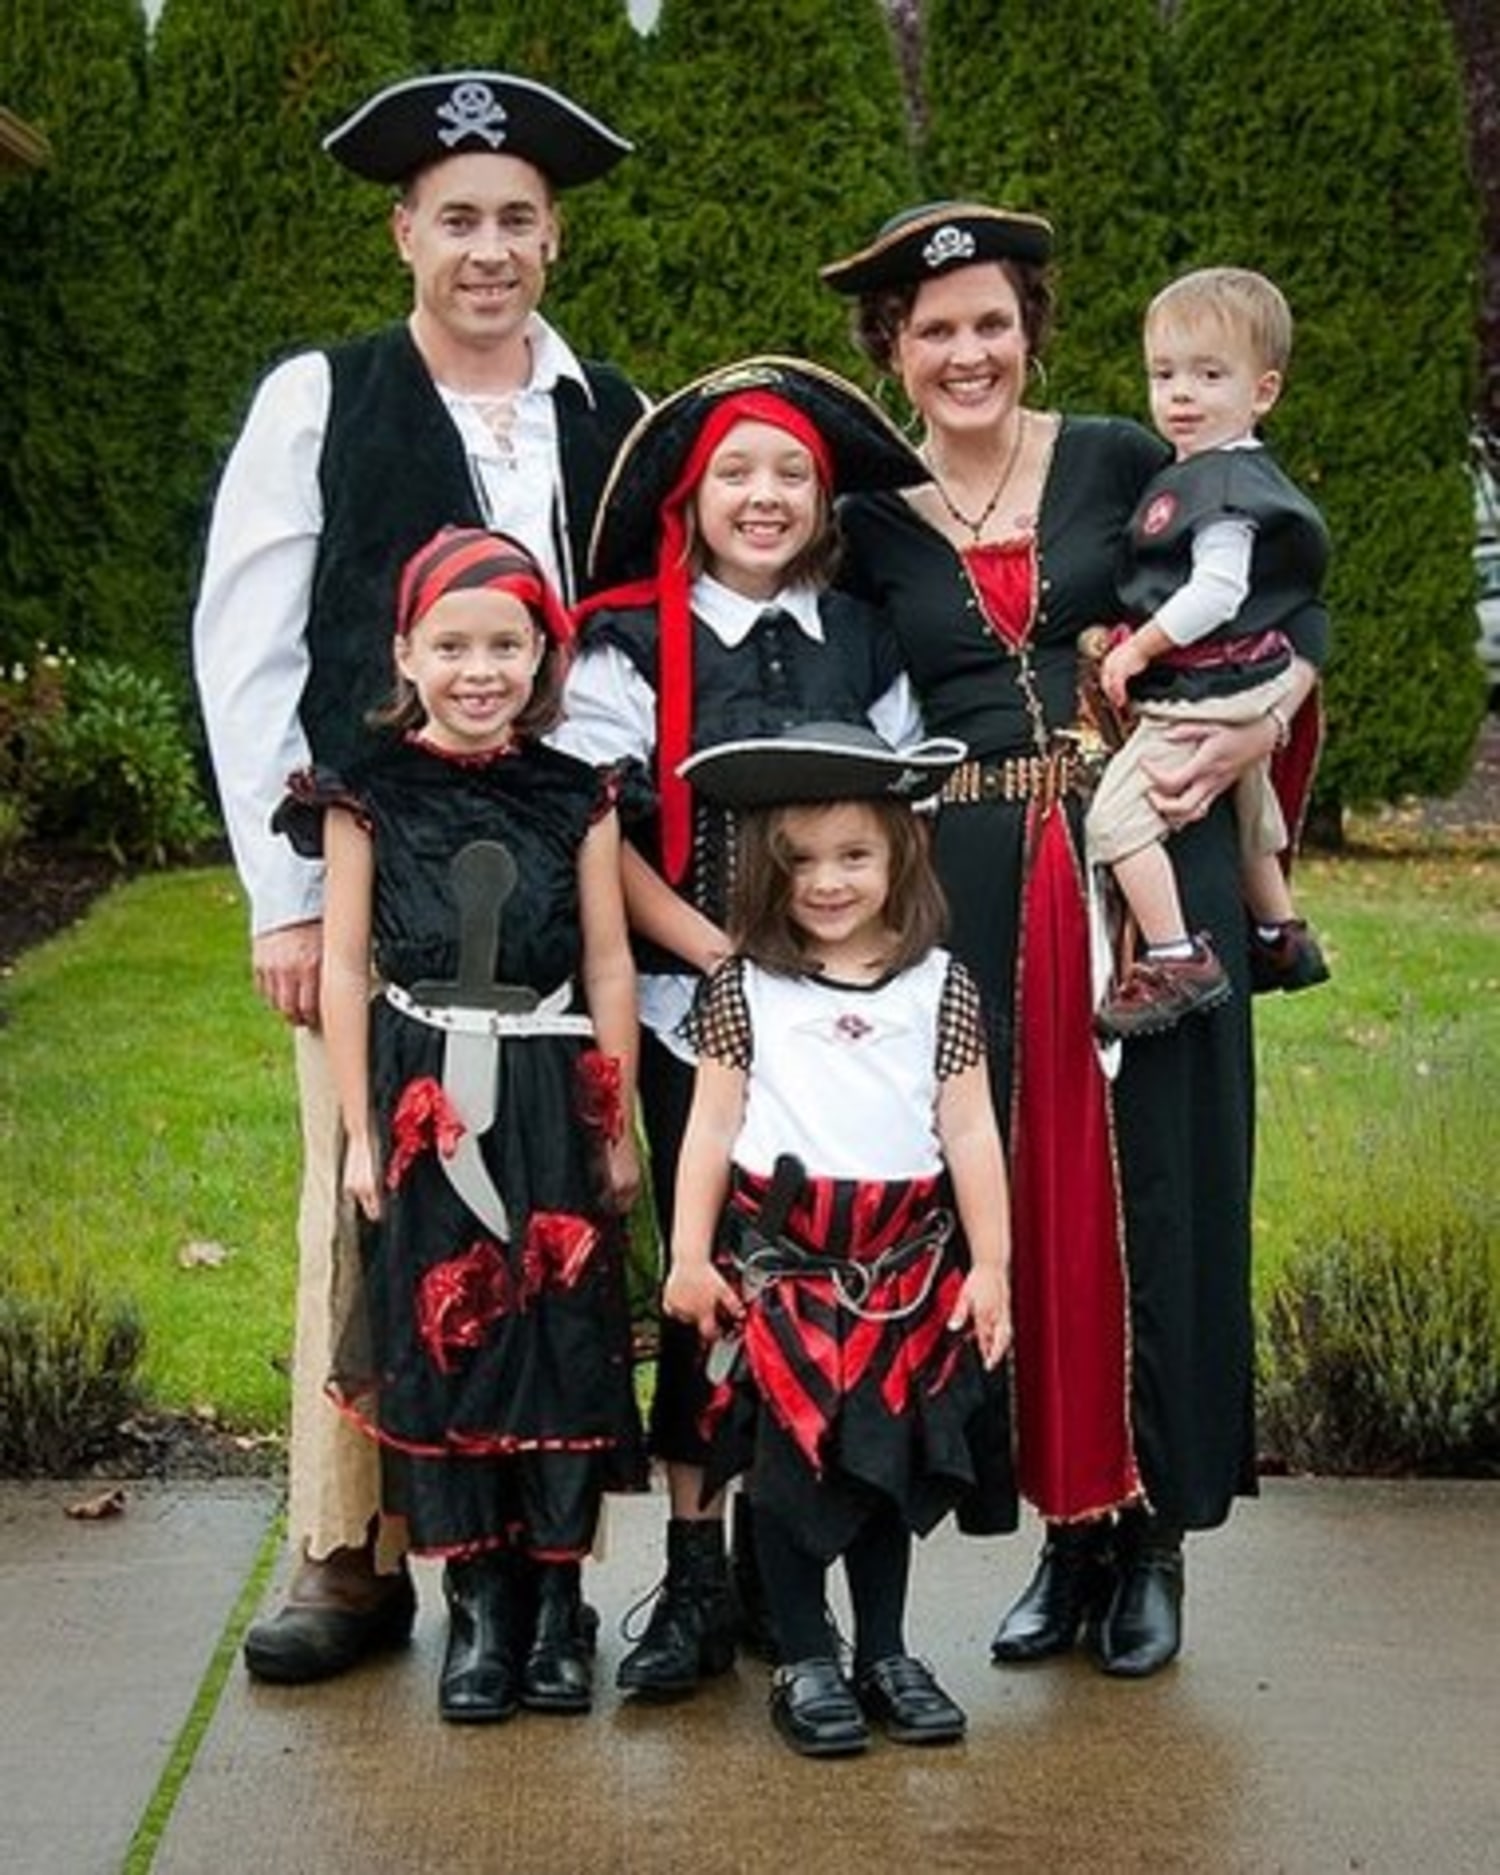 Are you a matchy-matchy Halloween family?